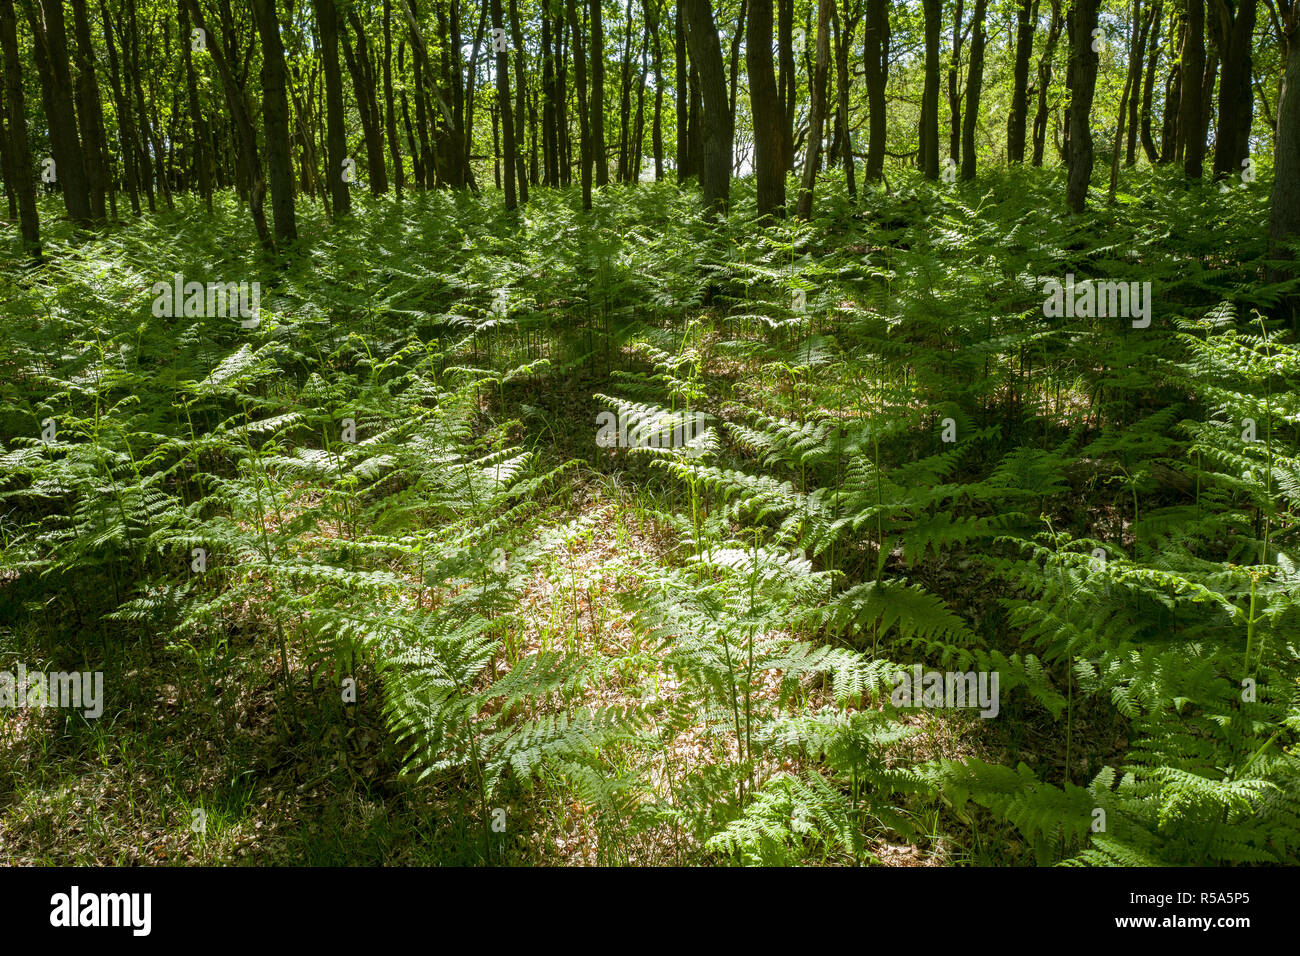 Forest with oak trees and ferns. Stock Photo